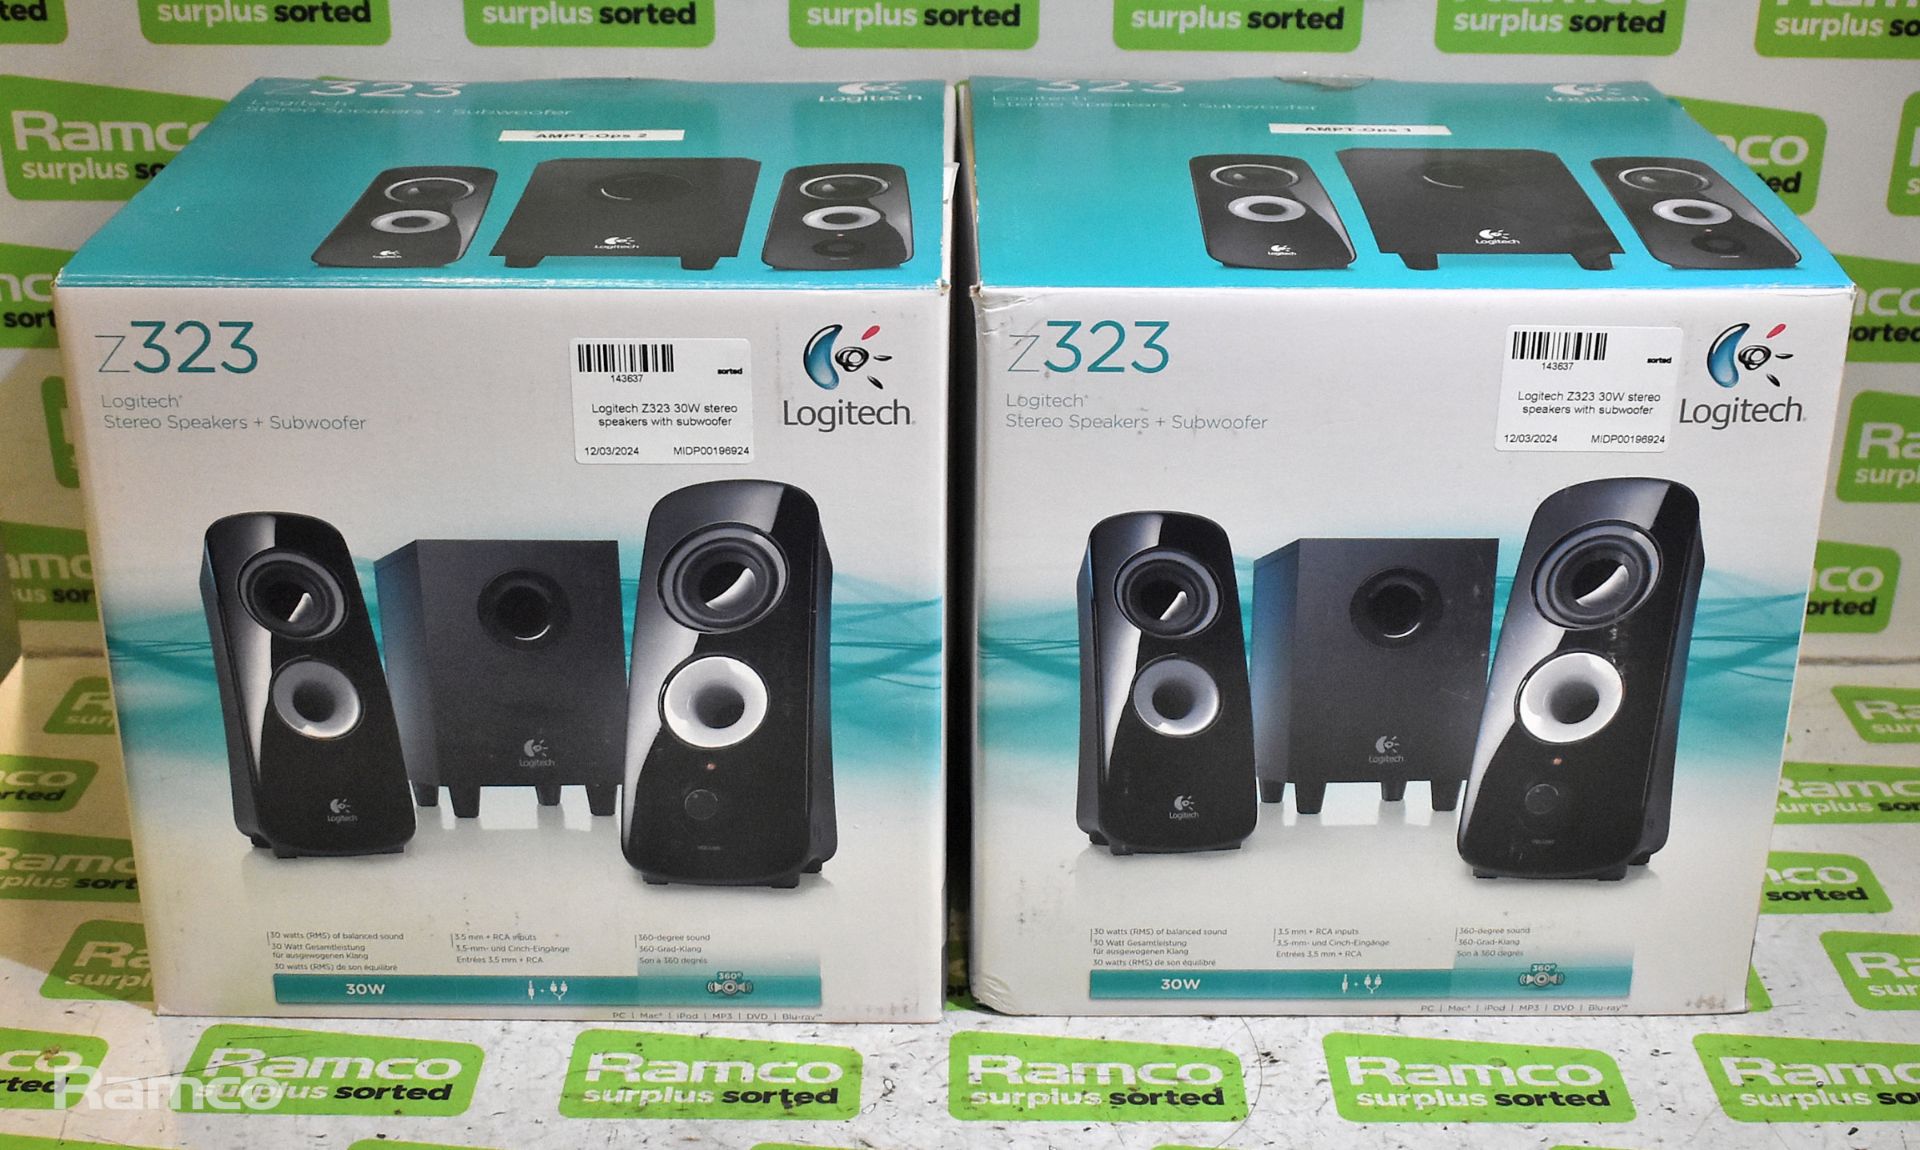 2x Logitech Z323 30W stereo speaker sets with subwoofer - Image 5 of 5